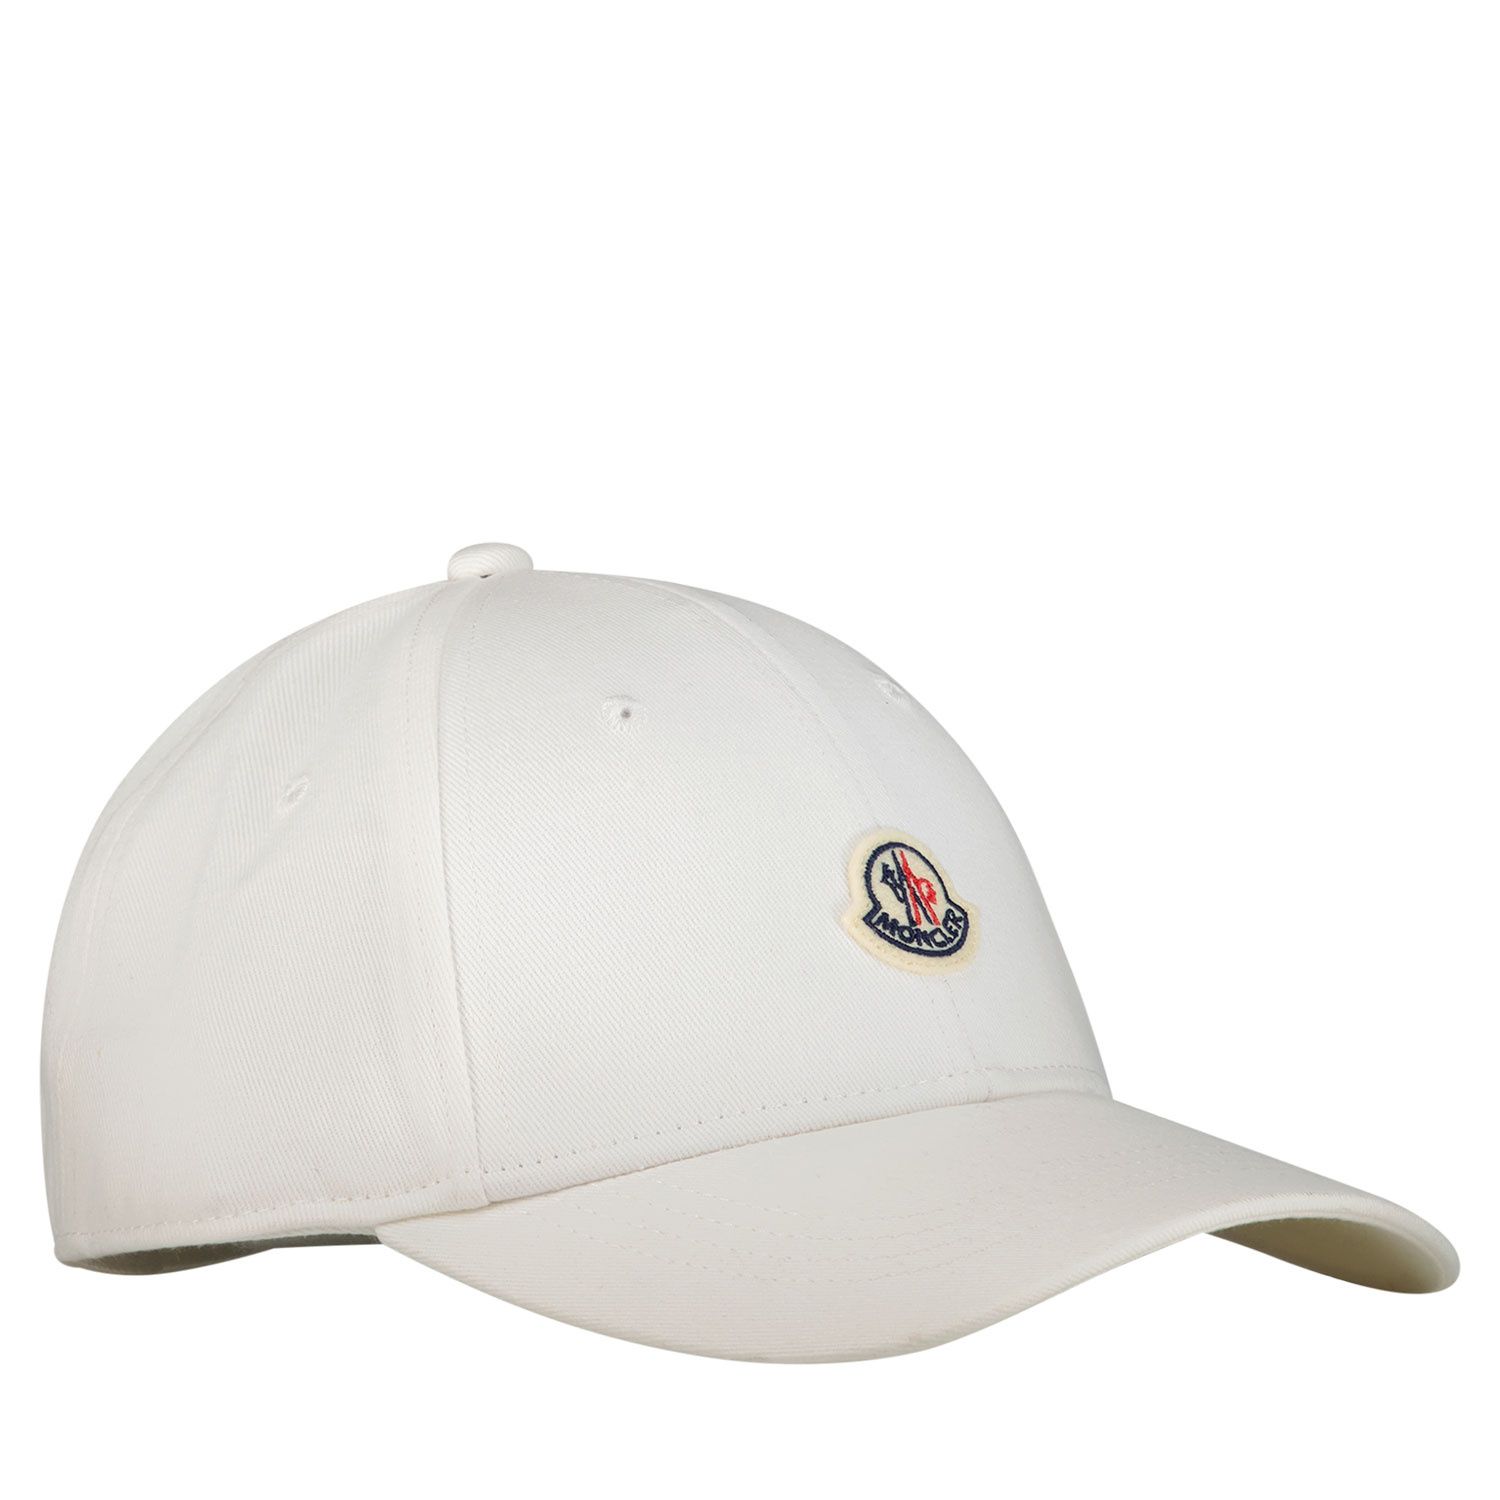 Picture of Moncler 3B00016 kids cap white